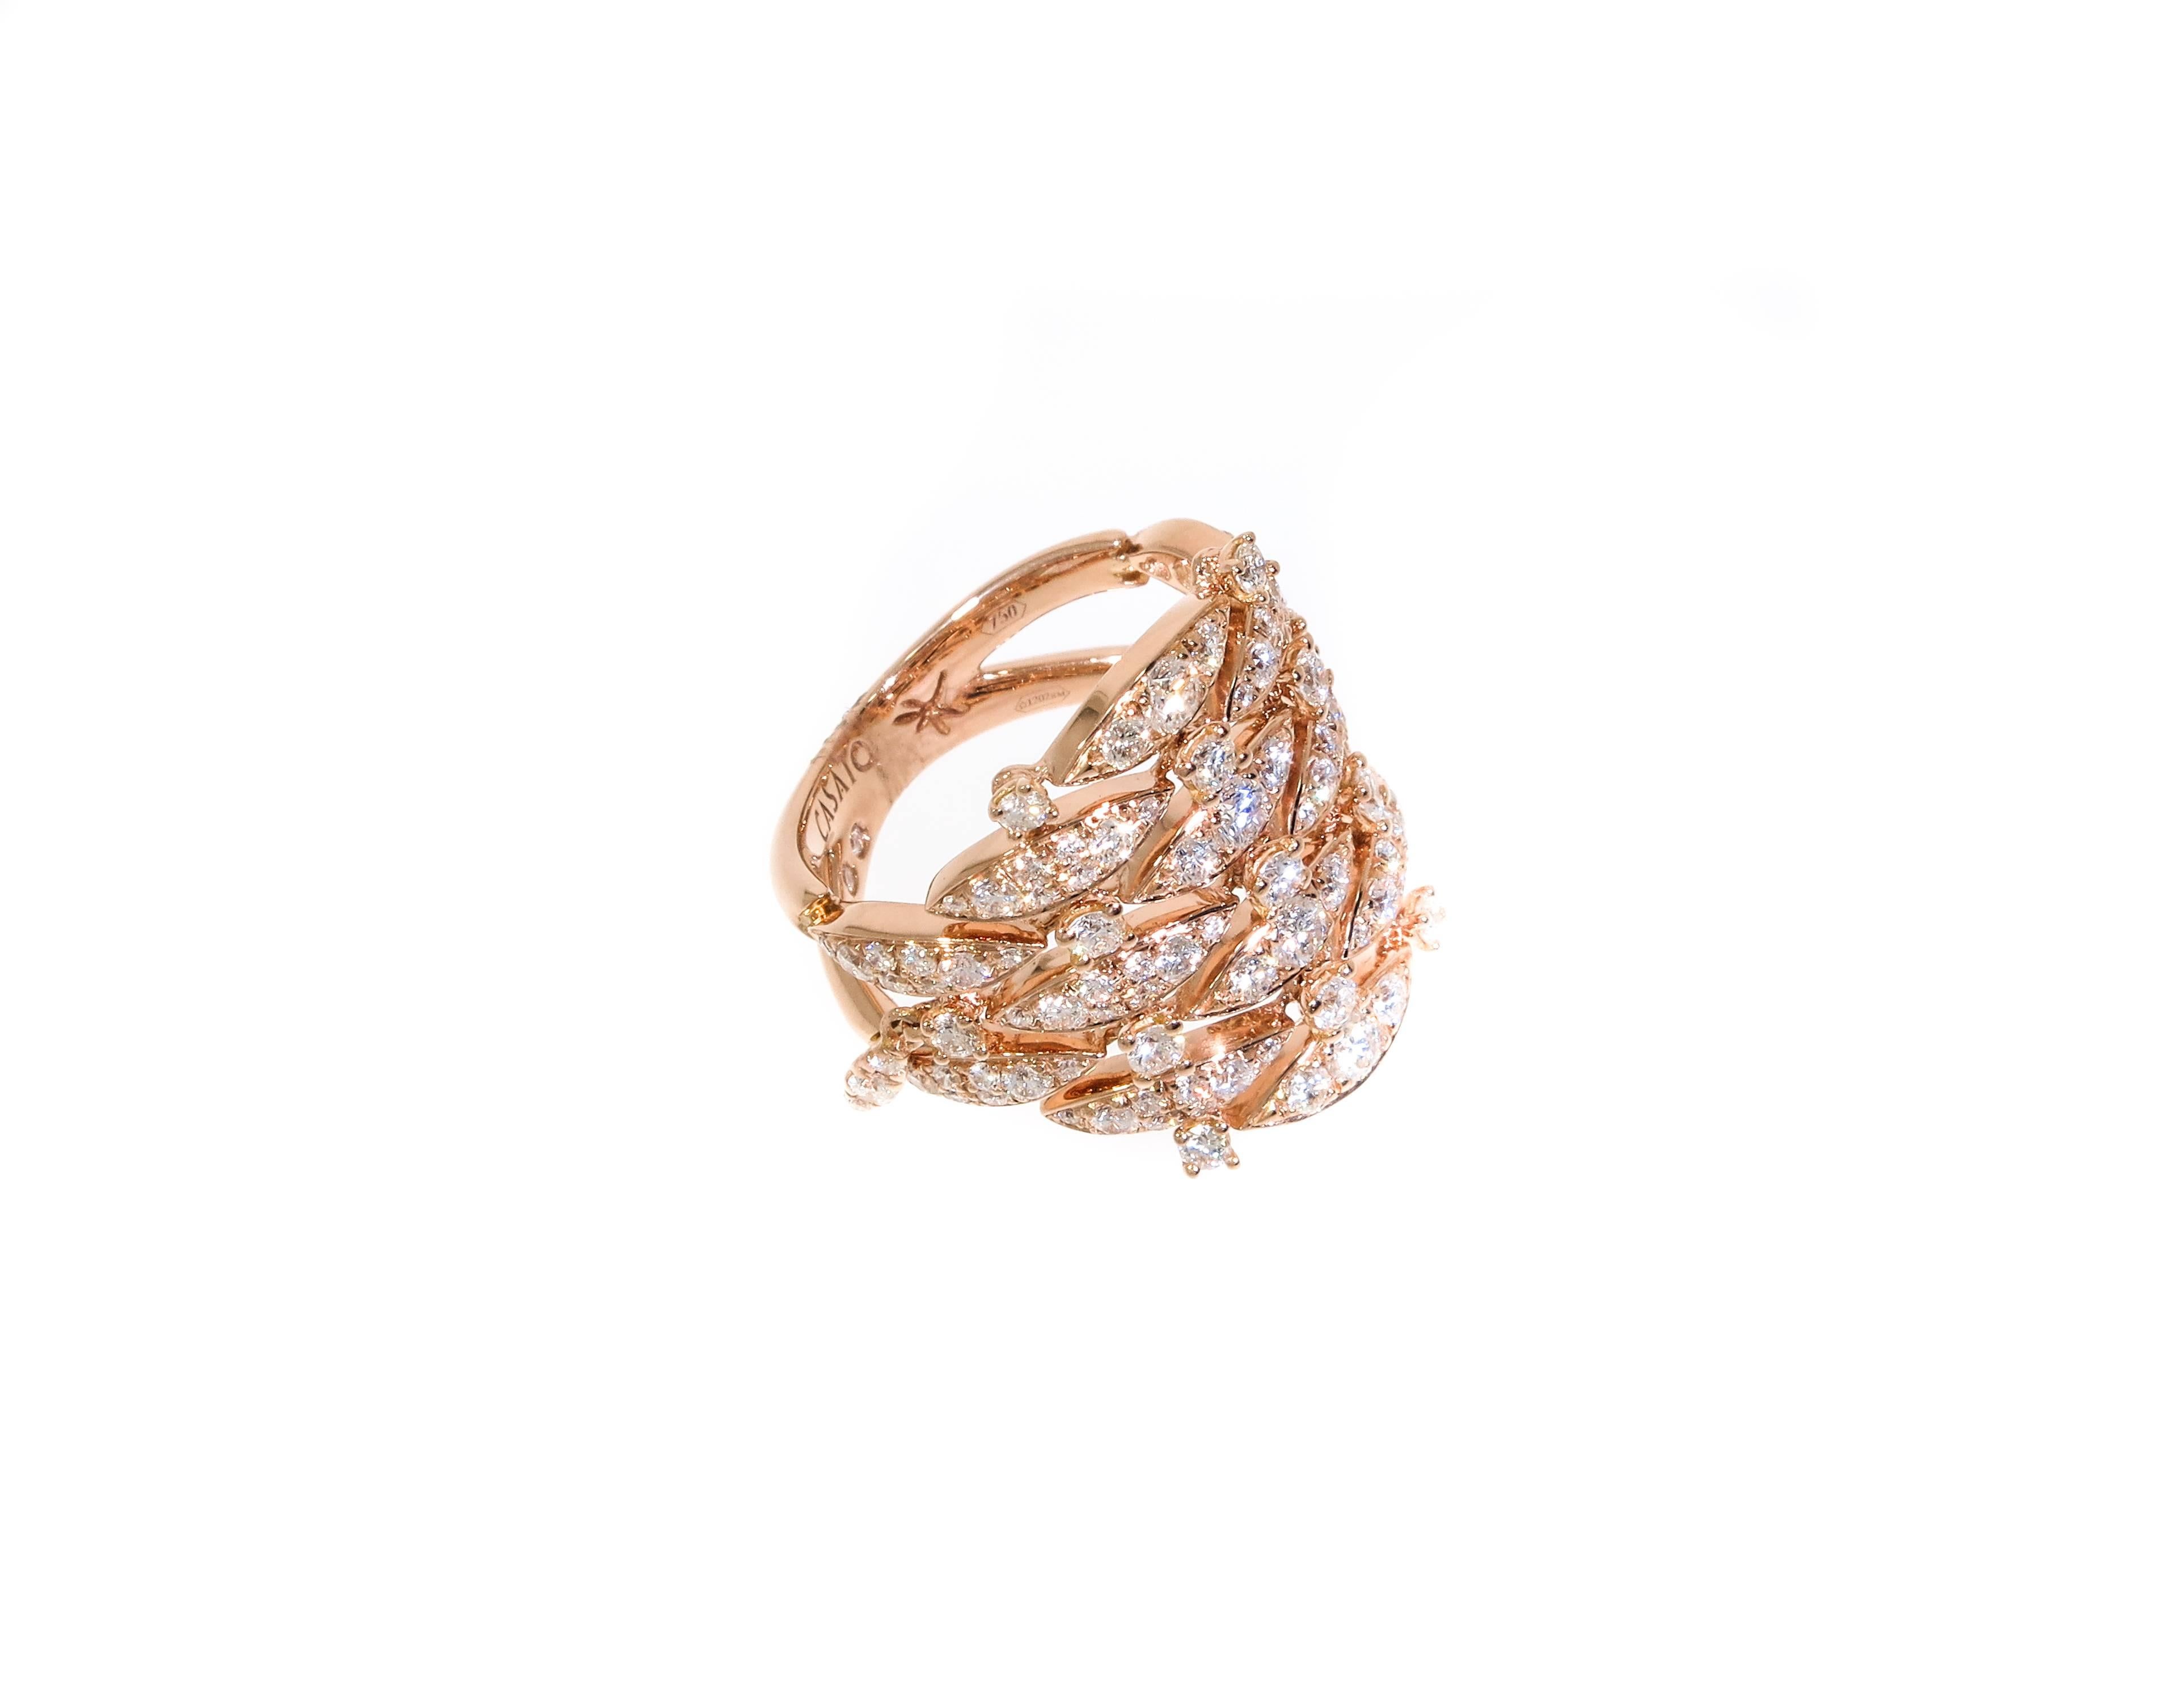 Refined design and personal style are intertwined in a dance in the pursuit of elegance and femininity, directly inspired by the sensuality of women.
The refinement of Italian craftsmanship is easily appreciated in this fabulous ring from the Vie in